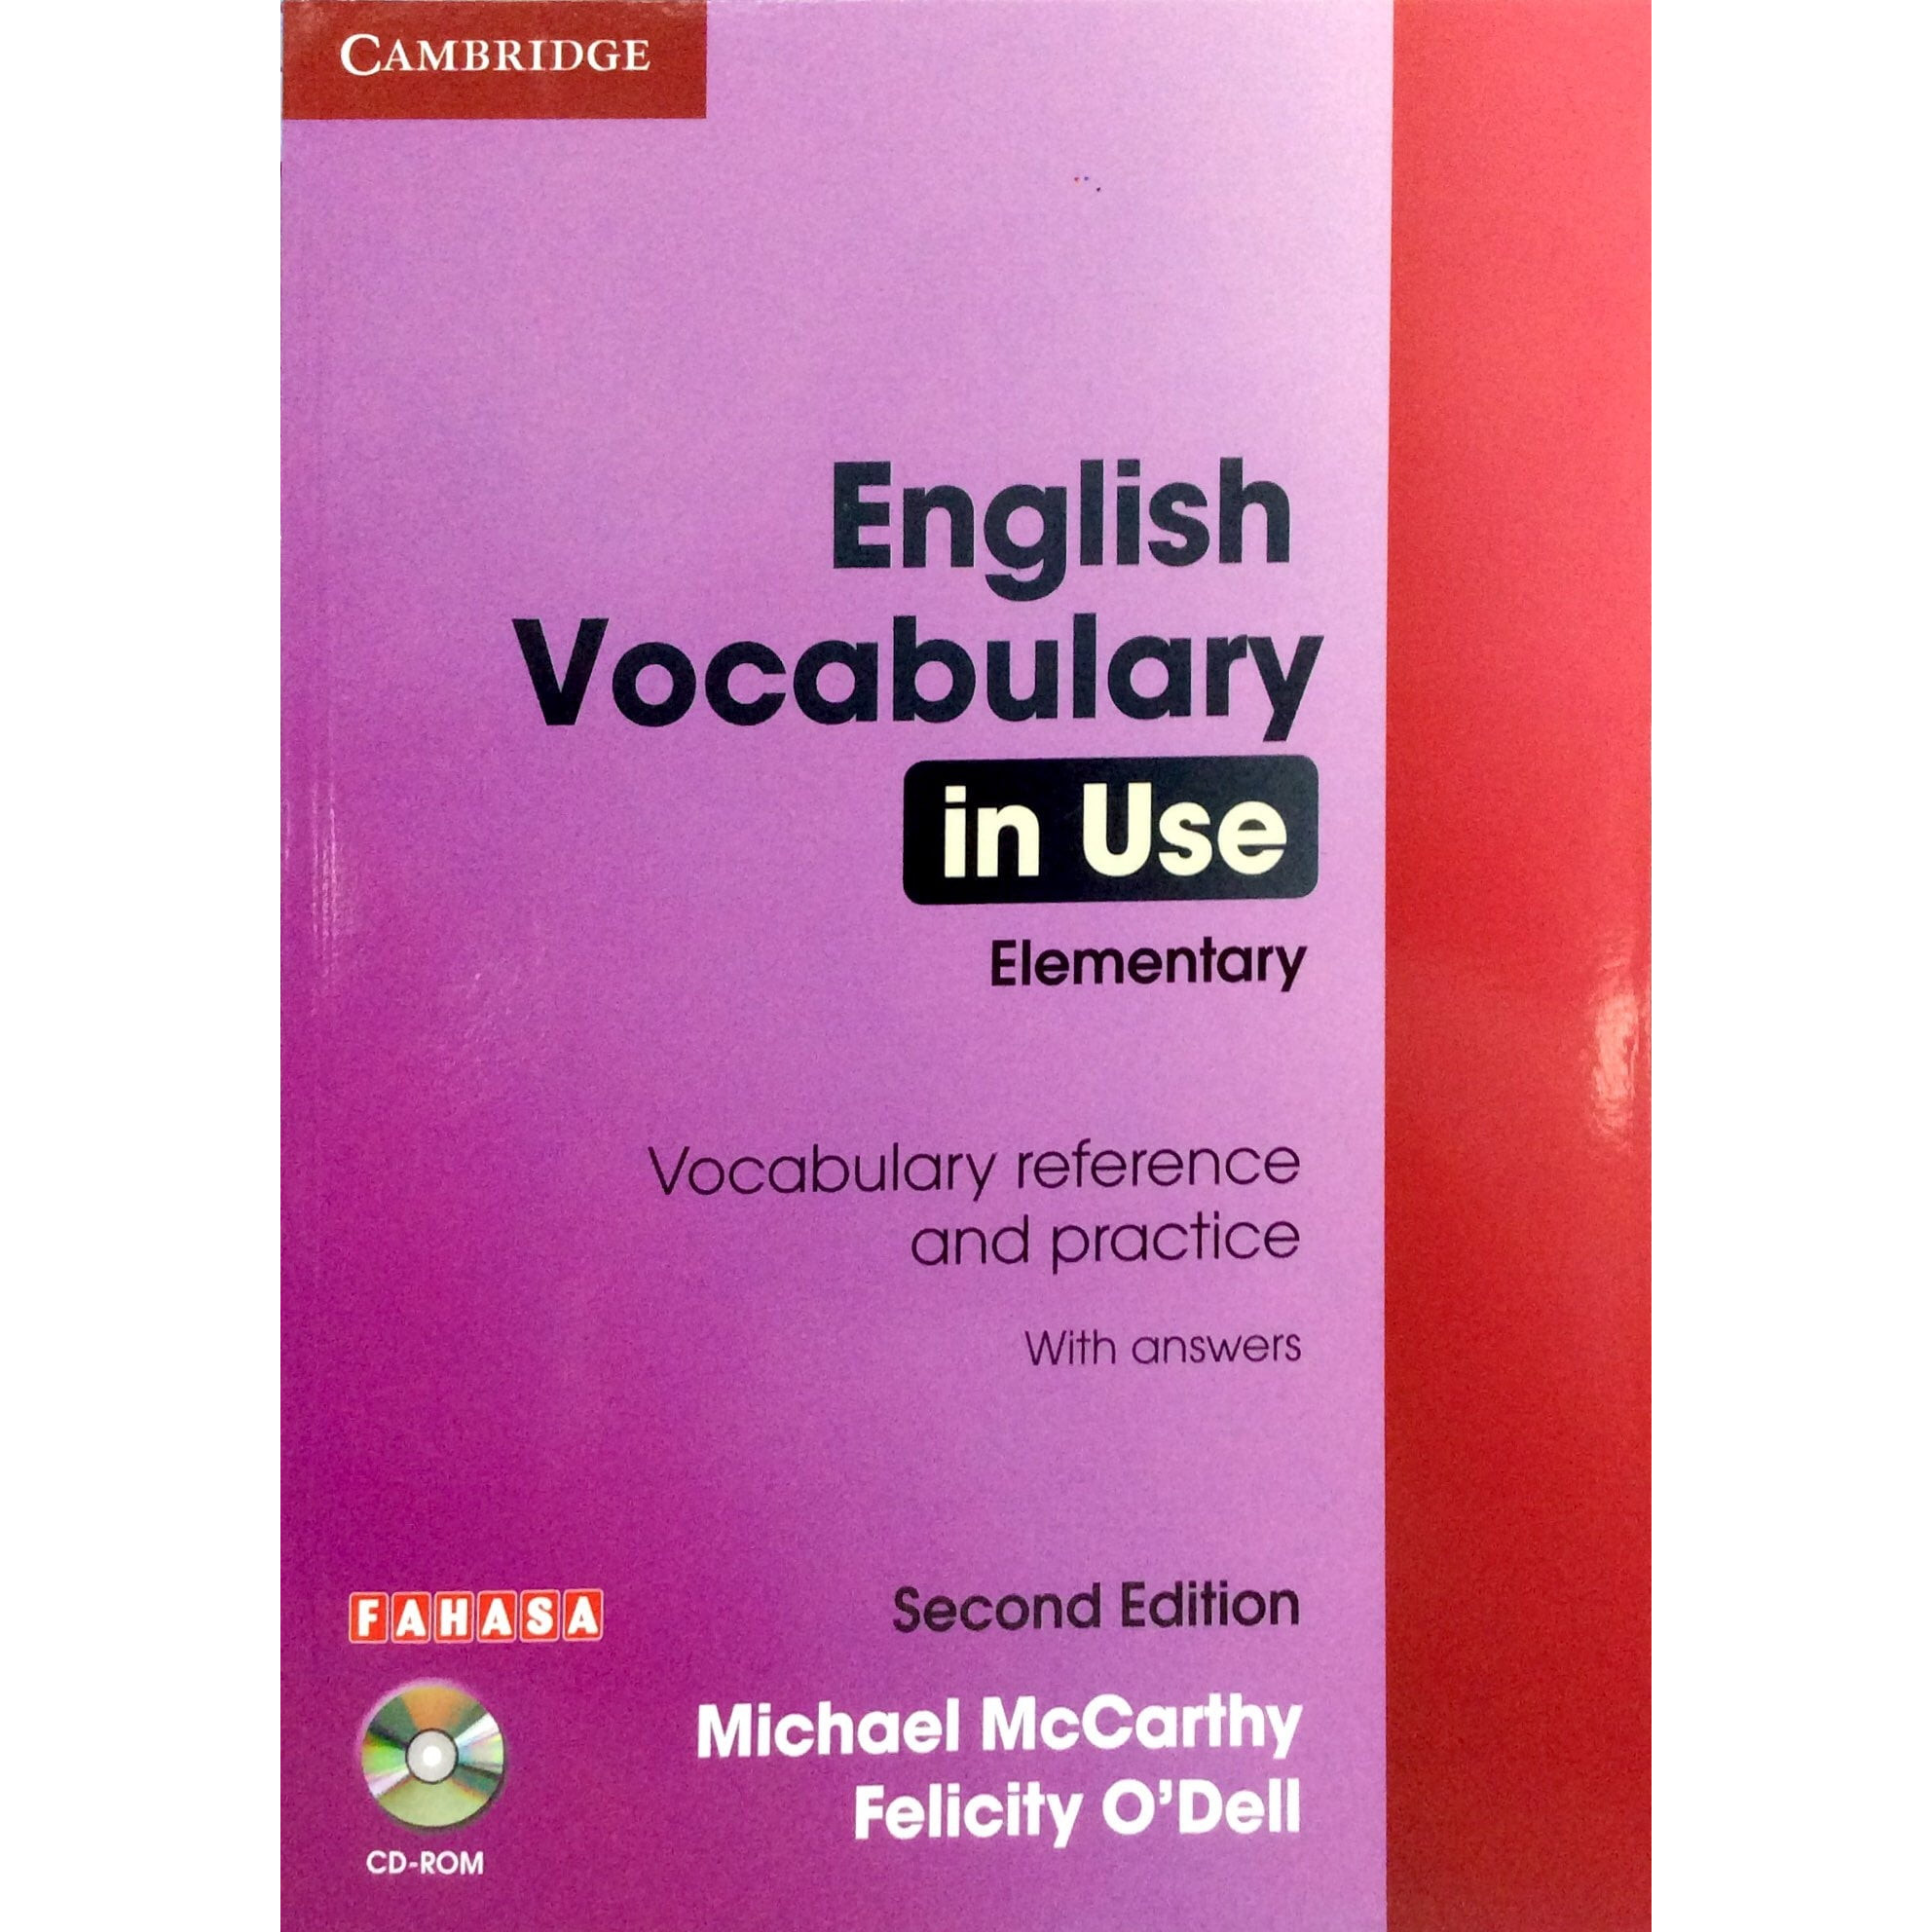 English Vocabulary in Use: Elementary Book with Answers Reprint Edition: Vocabulary Reference and Practice (CD-ROM)